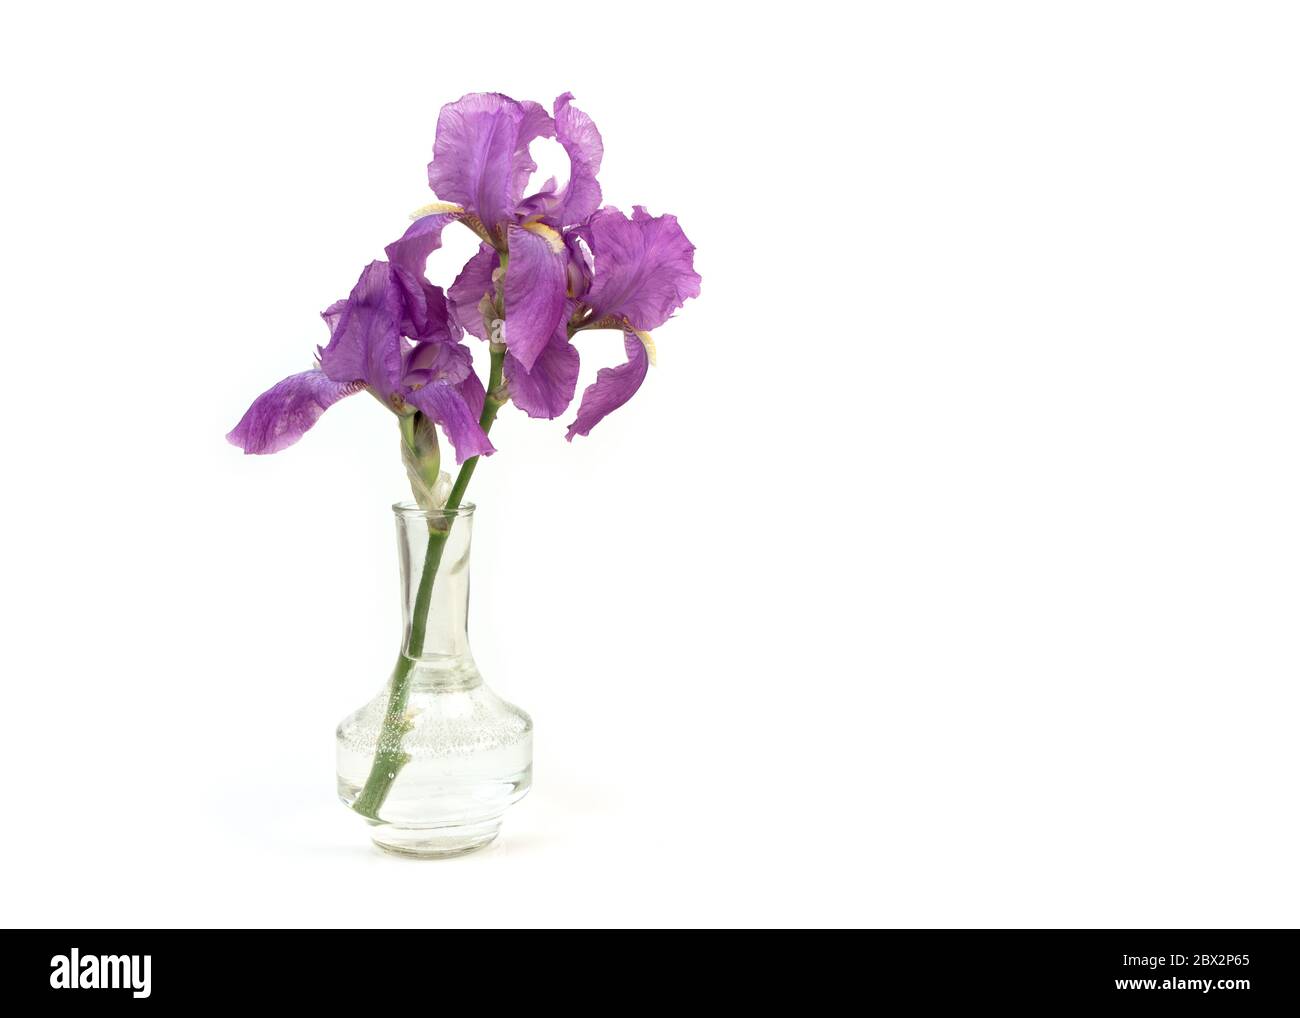 Still life with a beautiful fresh spring flower purple Iris in a glass vase bottle isolated on white background. Minimal art composition. Stock Photo